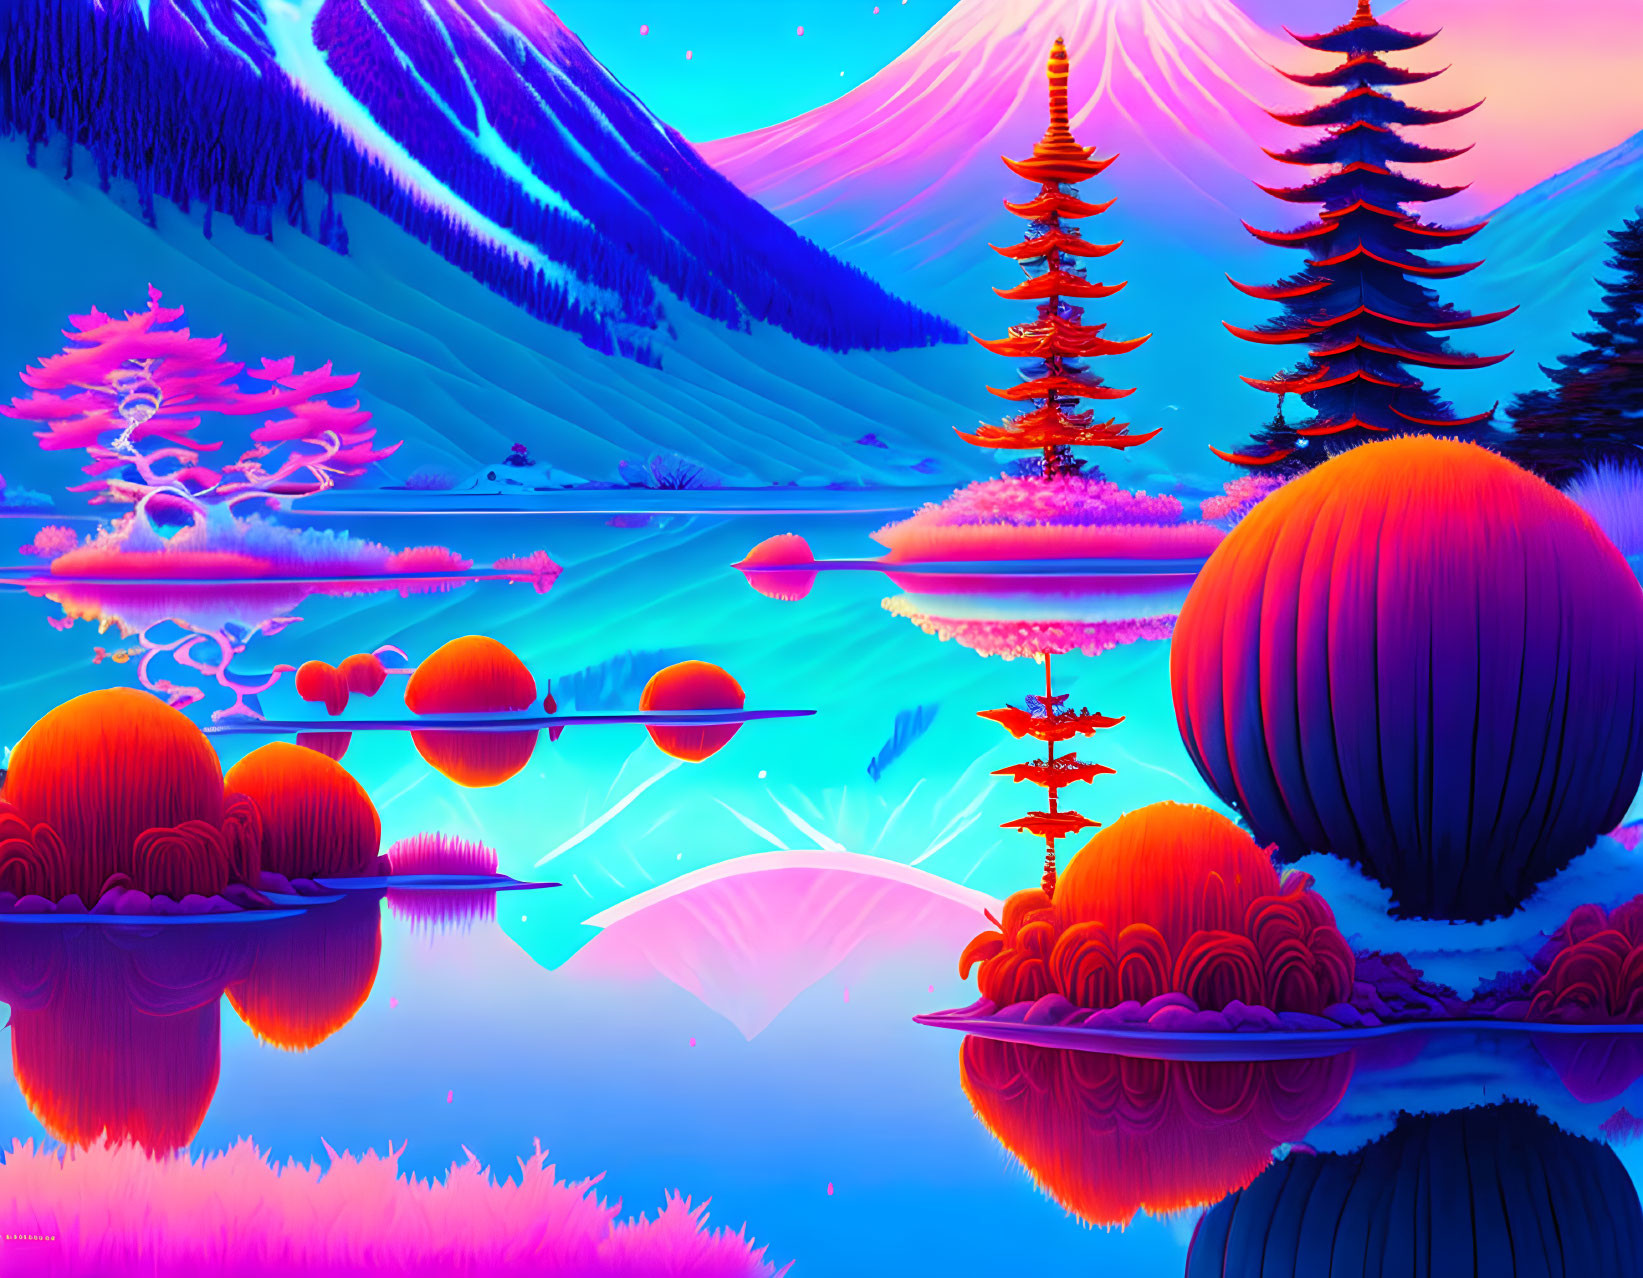 Colorful surreal landscape with neon trees, reflective waters, and snow-capped mountain.